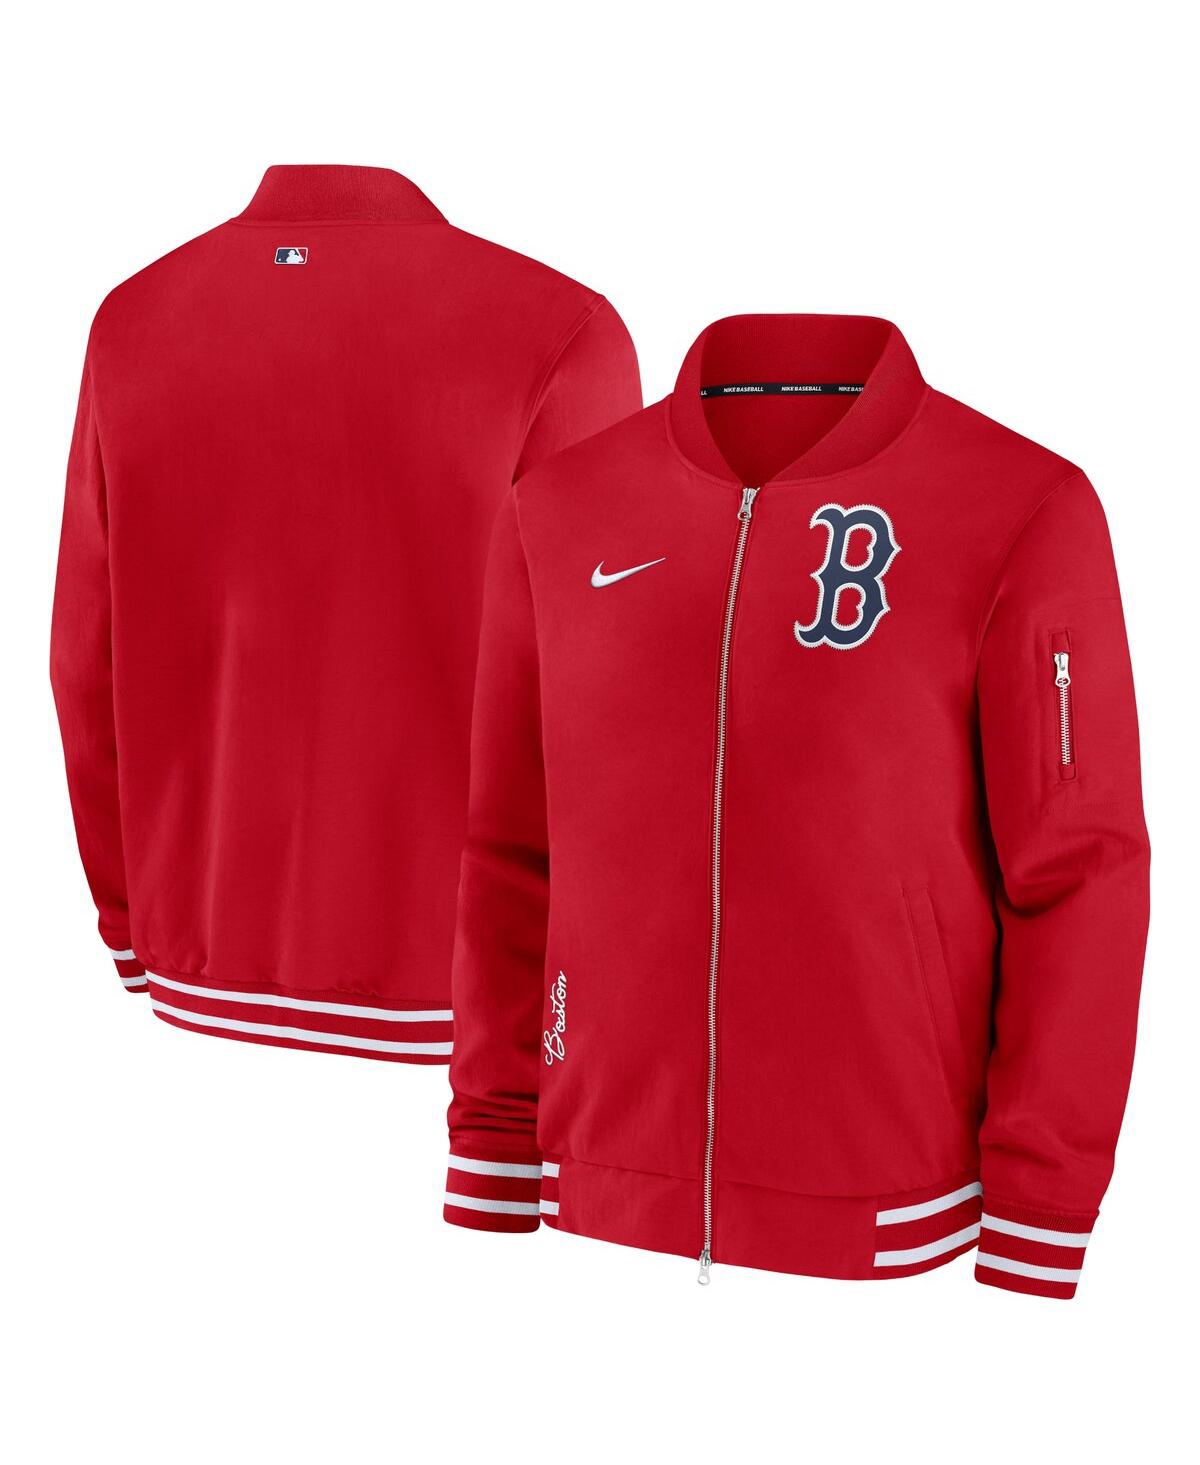 Men's Nike Red Boston Red Sox Authentic Collection Full-Zip Bomber Jacket - Red